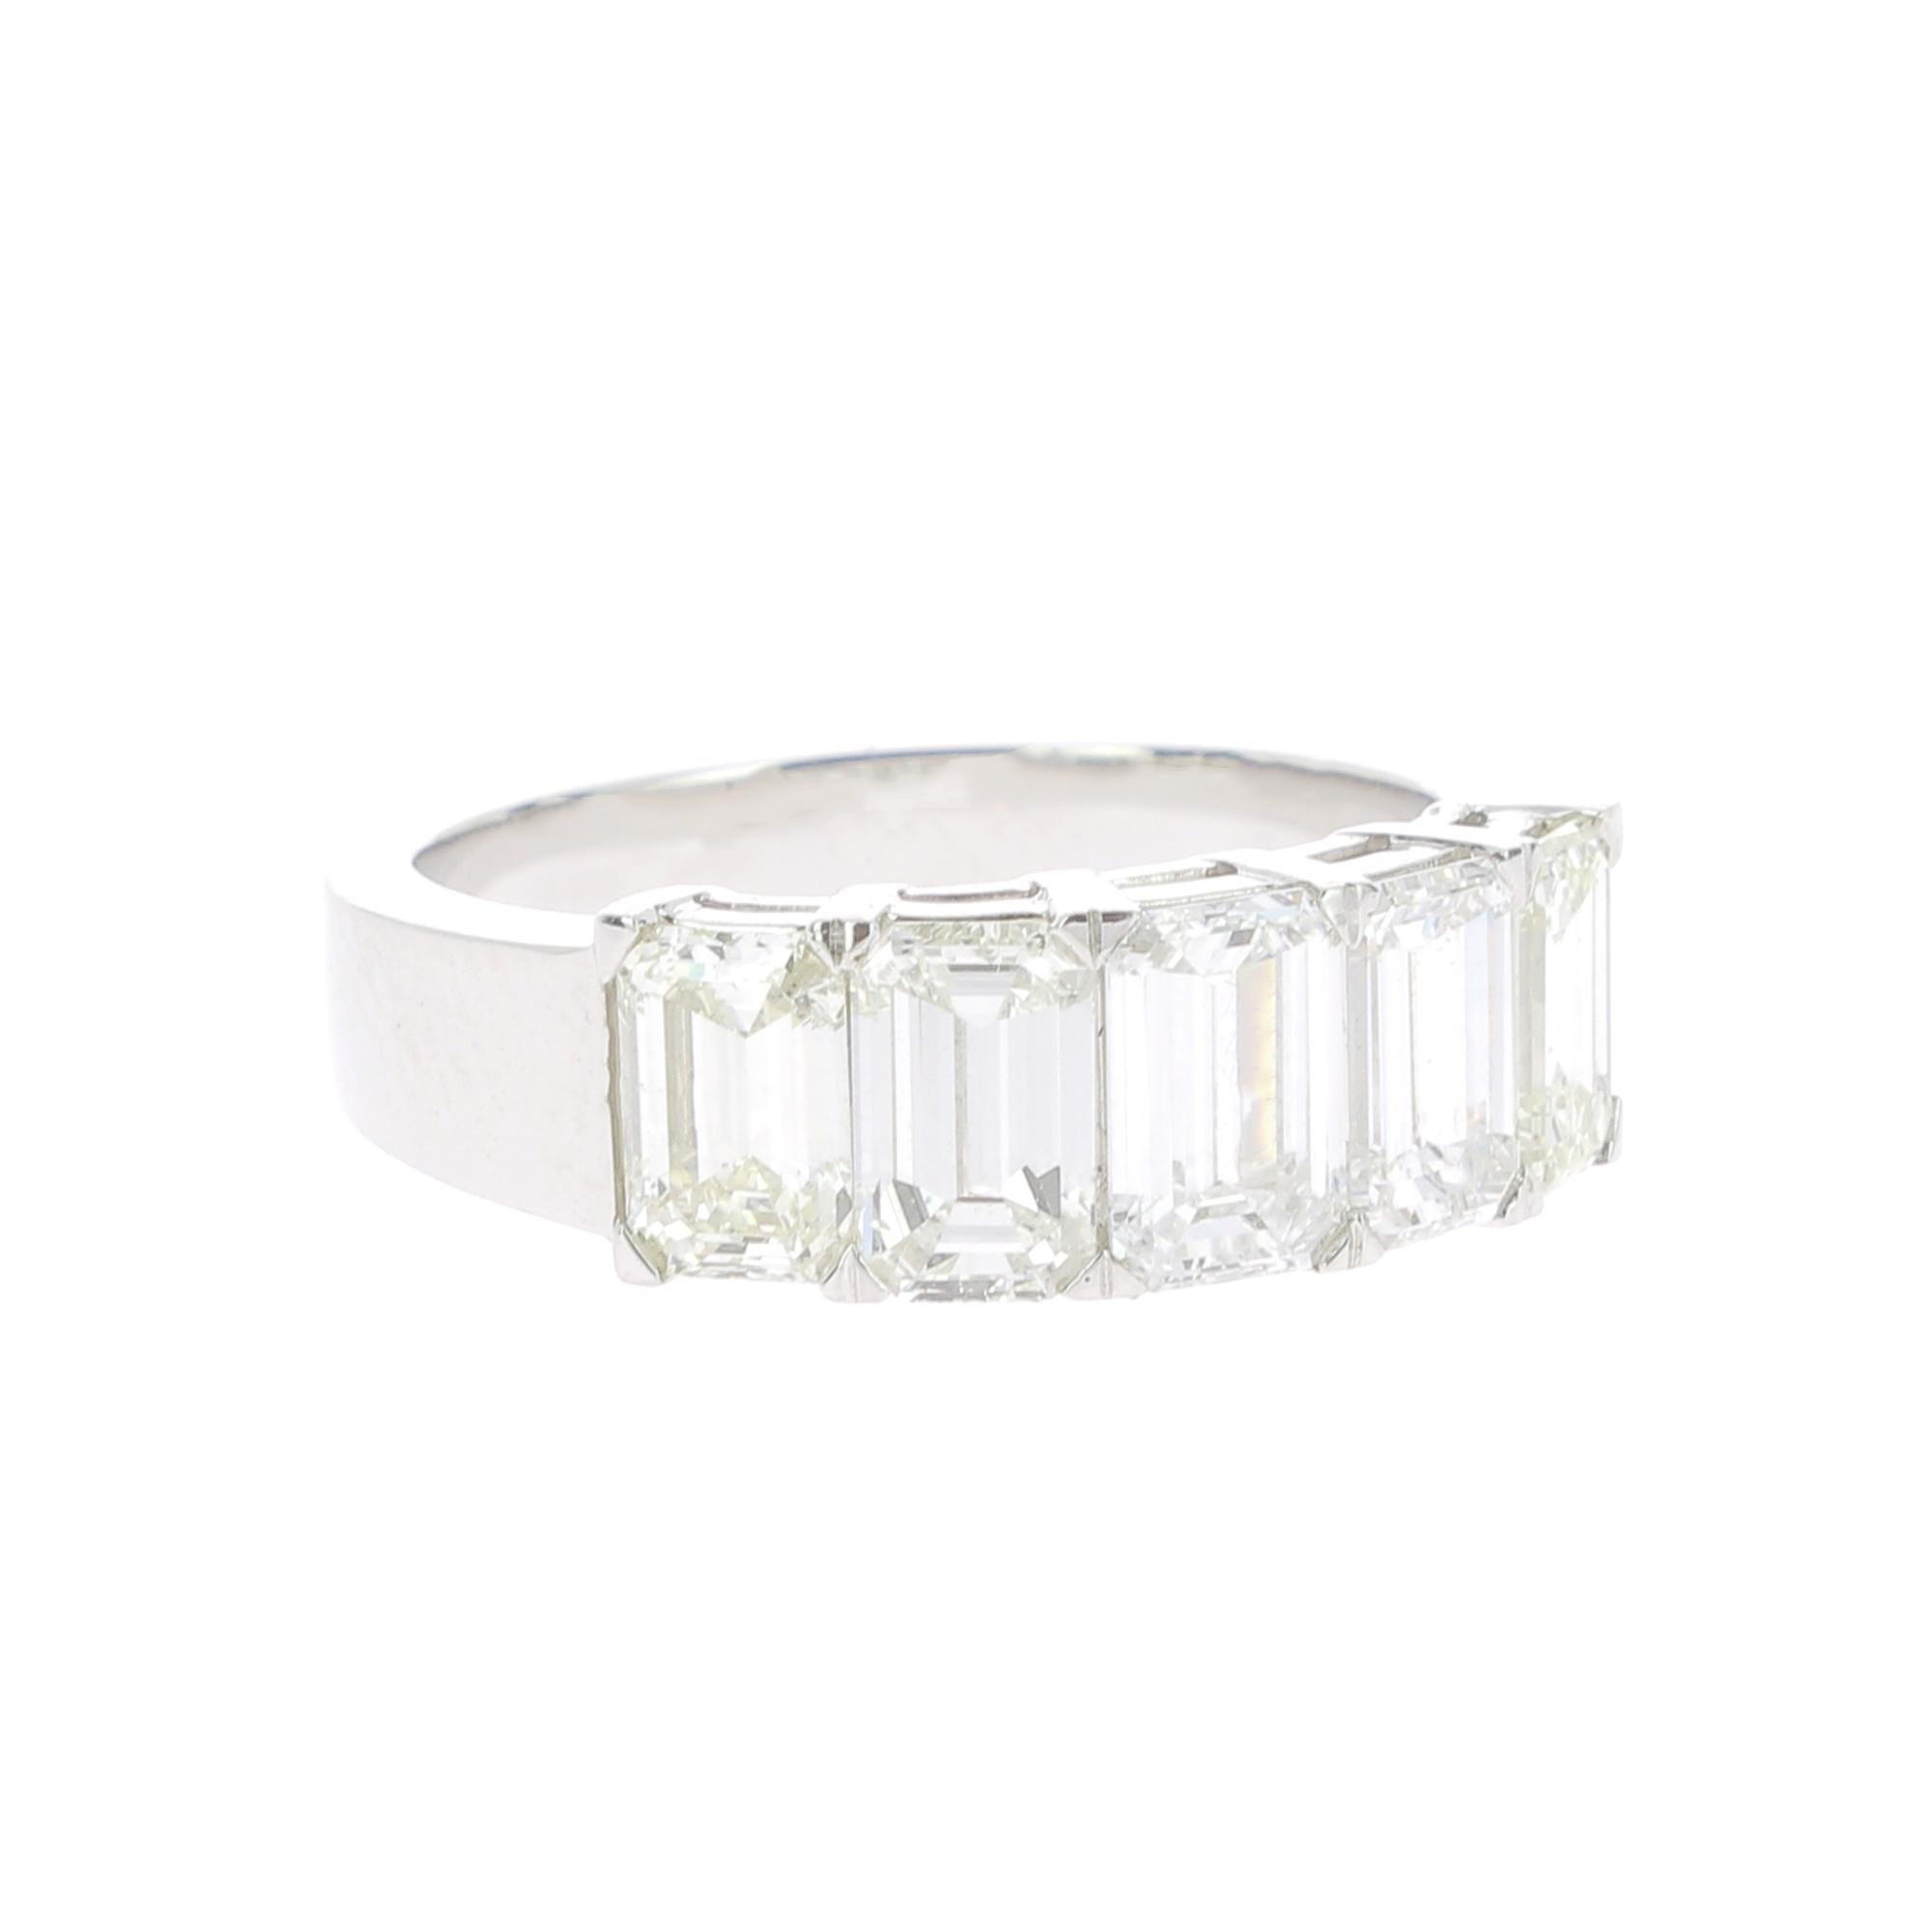 Contemporary  2.71 Carat Emerald Cut Diamond Half Eternity Rings / Band Ring 18K White Gold   For Sale